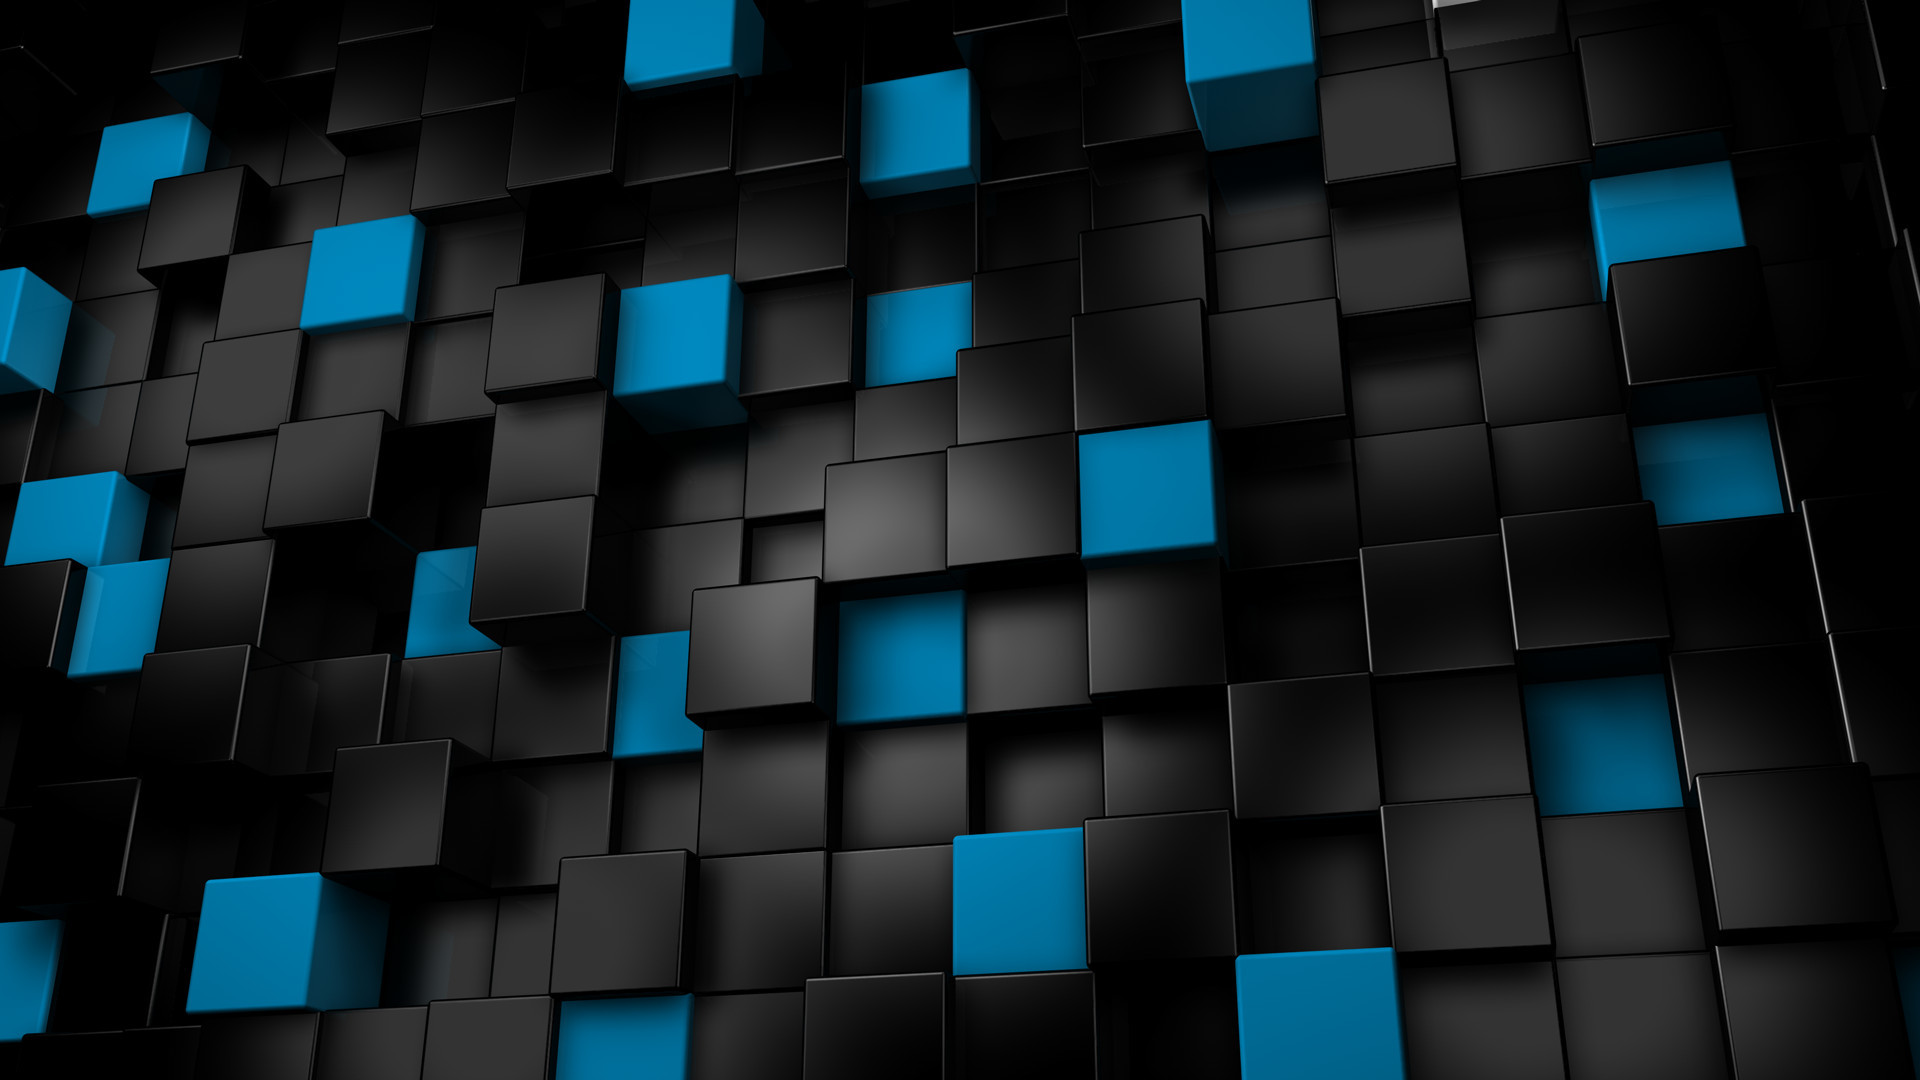 1920x1080 Abstract Blue and Black Cubes (1920x1800) ...